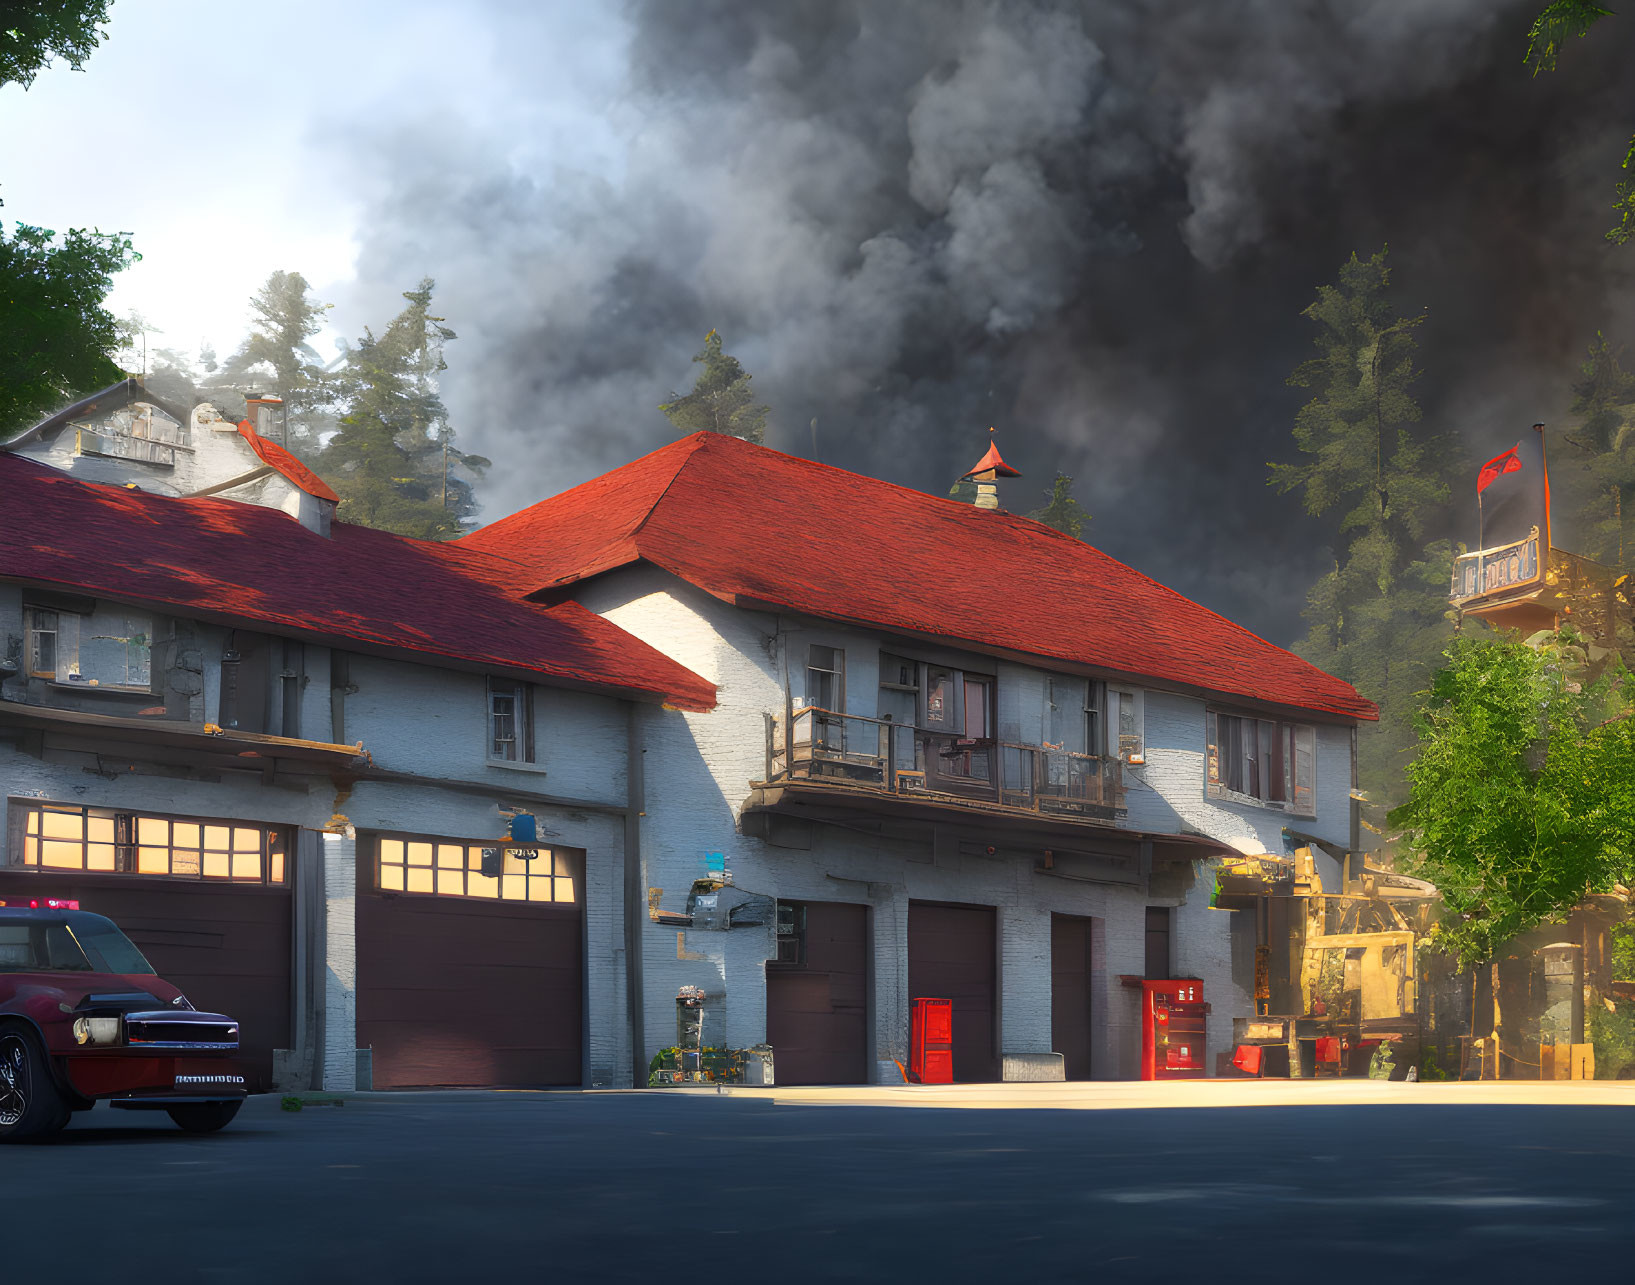 Vintage fire station with red doors, old car, trees, misty skies